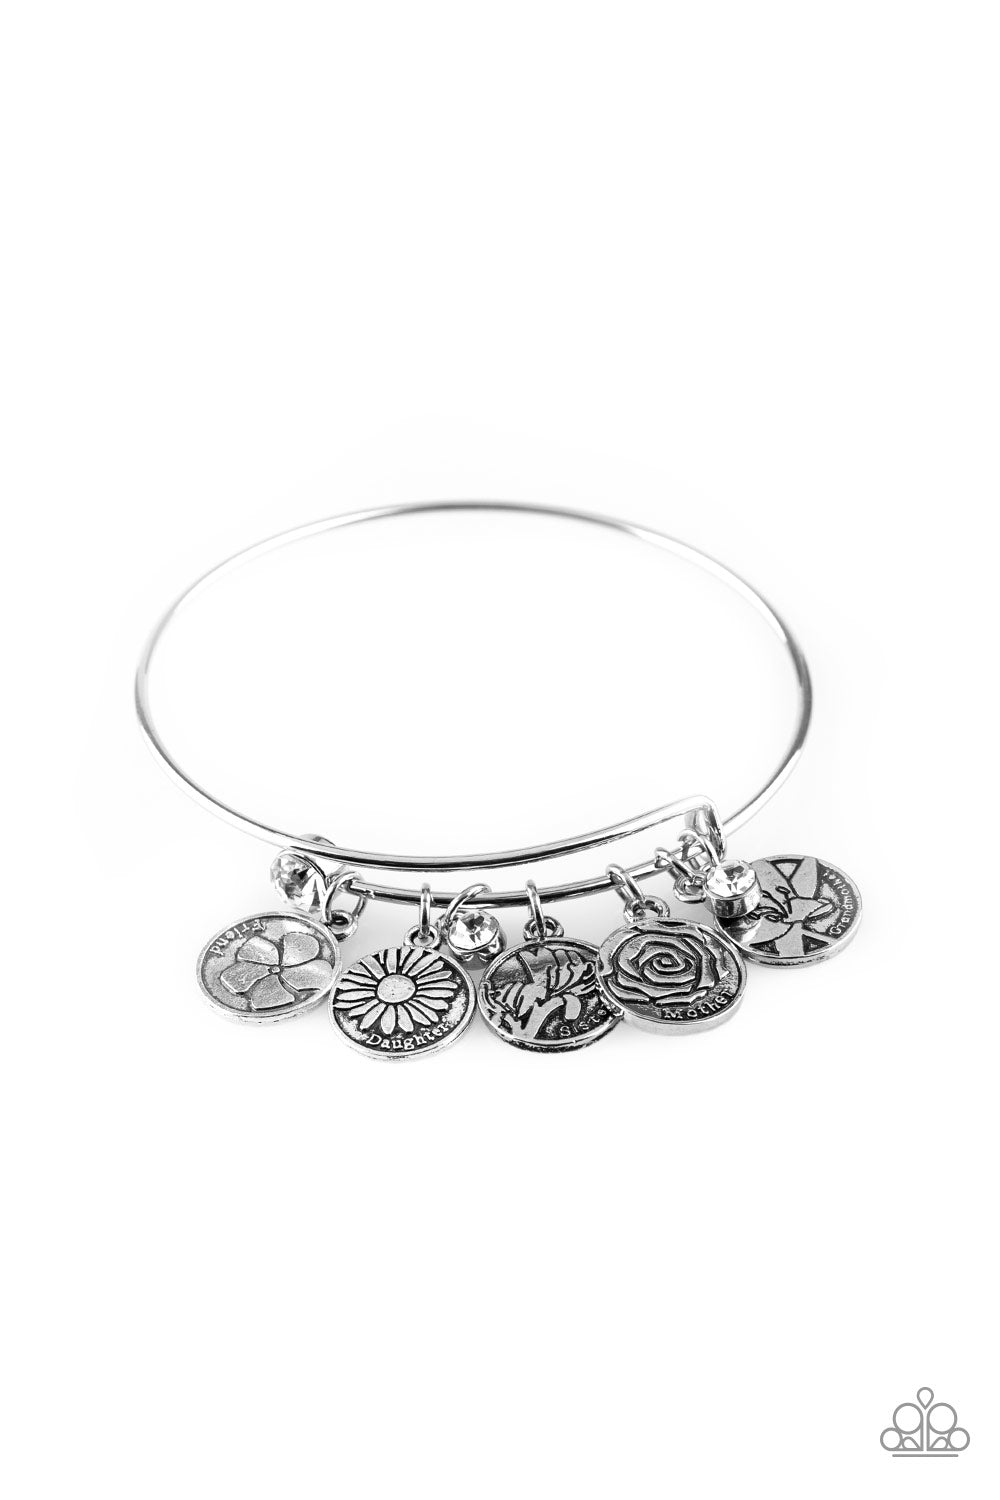 A skinny silver wire is adorned by a collection of small silver charms. Each charm features a floral design and one of the many titles that women hold throughout their lives. Words include, “Mother”, “Grandmother”, “Sister”, Daughter”, and “Friend.” A small white rhinestone is nestled among the silver charms, while a larger one is placed as an end cap on the spiraling wire, both adding sparkling accents to the piece. The coil can be expanded to accommodate a larger wrist.  Sold as one individual bracelet.